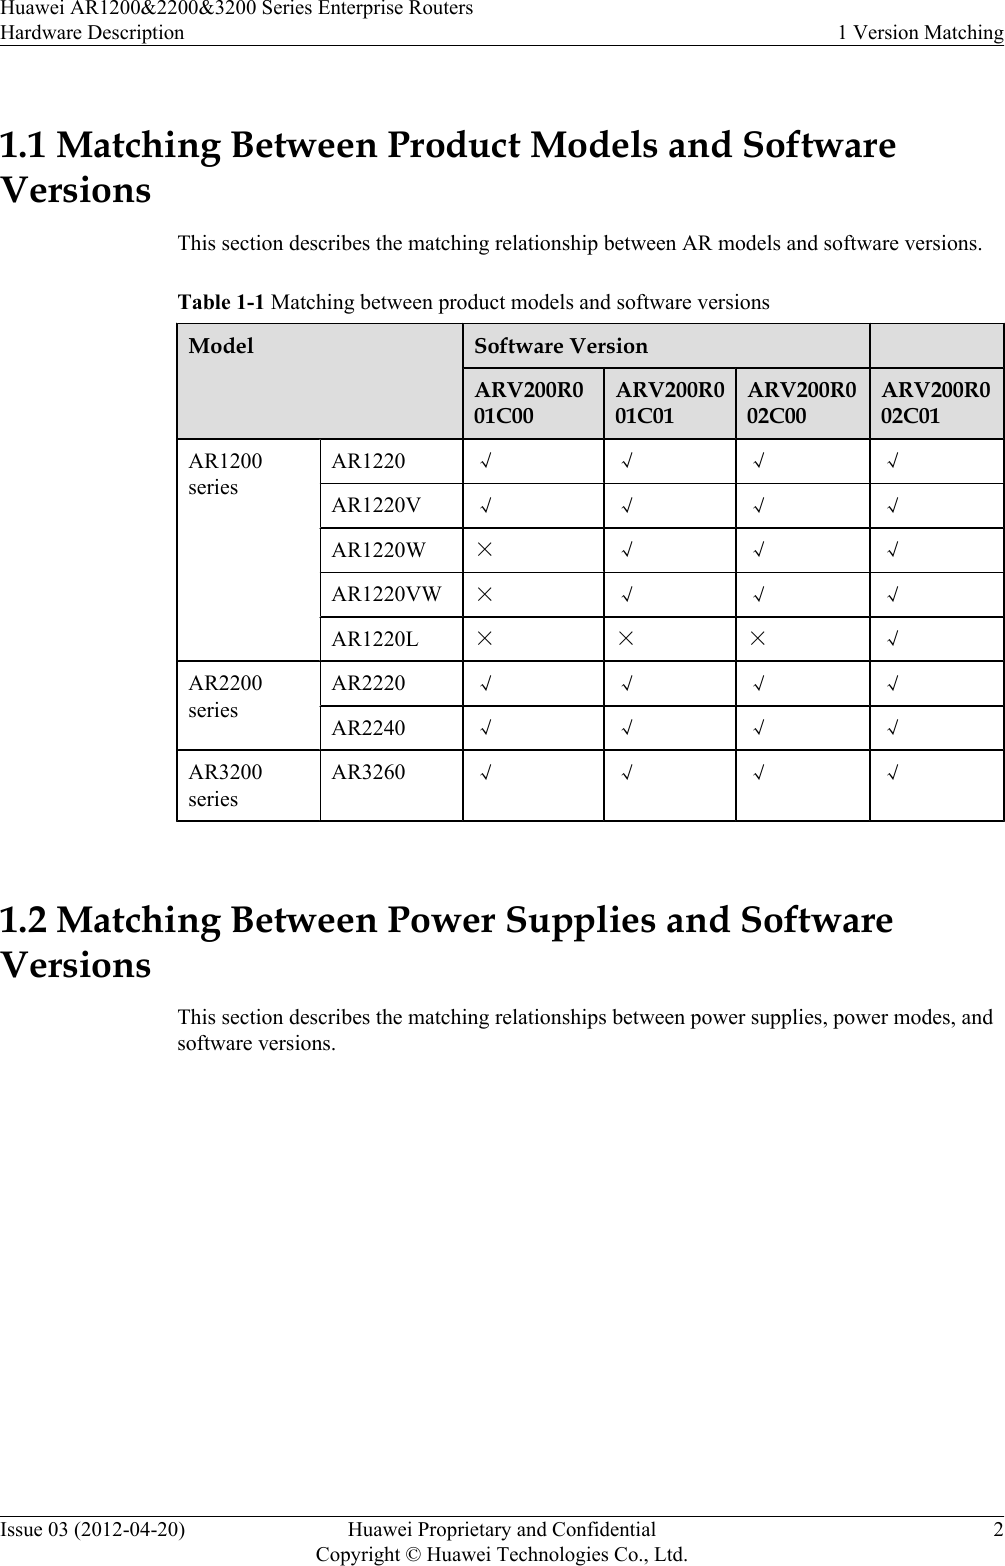 1.1 Matching Between Product Models and SoftwareVersionsThis section describes the matching relationship between AR models and software versions.Table 1-1 Matching between product models and software versionsModel Software Version  ARV200R001C00ARV200R001C01ARV200R002C00ARV200R002C01AR1200seriesAR1220 √ √ √ √AR1220V √ √ √ √AR1220W × √ √ √AR1220VW × √ √ √AR1220L × × × √AR2200seriesAR2220 √ √ √ √AR2240 √ √ √ √AR3200seriesAR3260 √ √ √ √ 1.2 Matching Between Power Supplies and SoftwareVersionsThis section describes the matching relationships between power supplies, power modes, andsoftware versions.Huawei AR1200&amp;2200&amp;3200 Series Enterprise RoutersHardware Description 1 Version MatchingIssue 03 (2012-04-20) Huawei Proprietary and ConfidentialCopyright © Huawei Technologies Co., Ltd.2